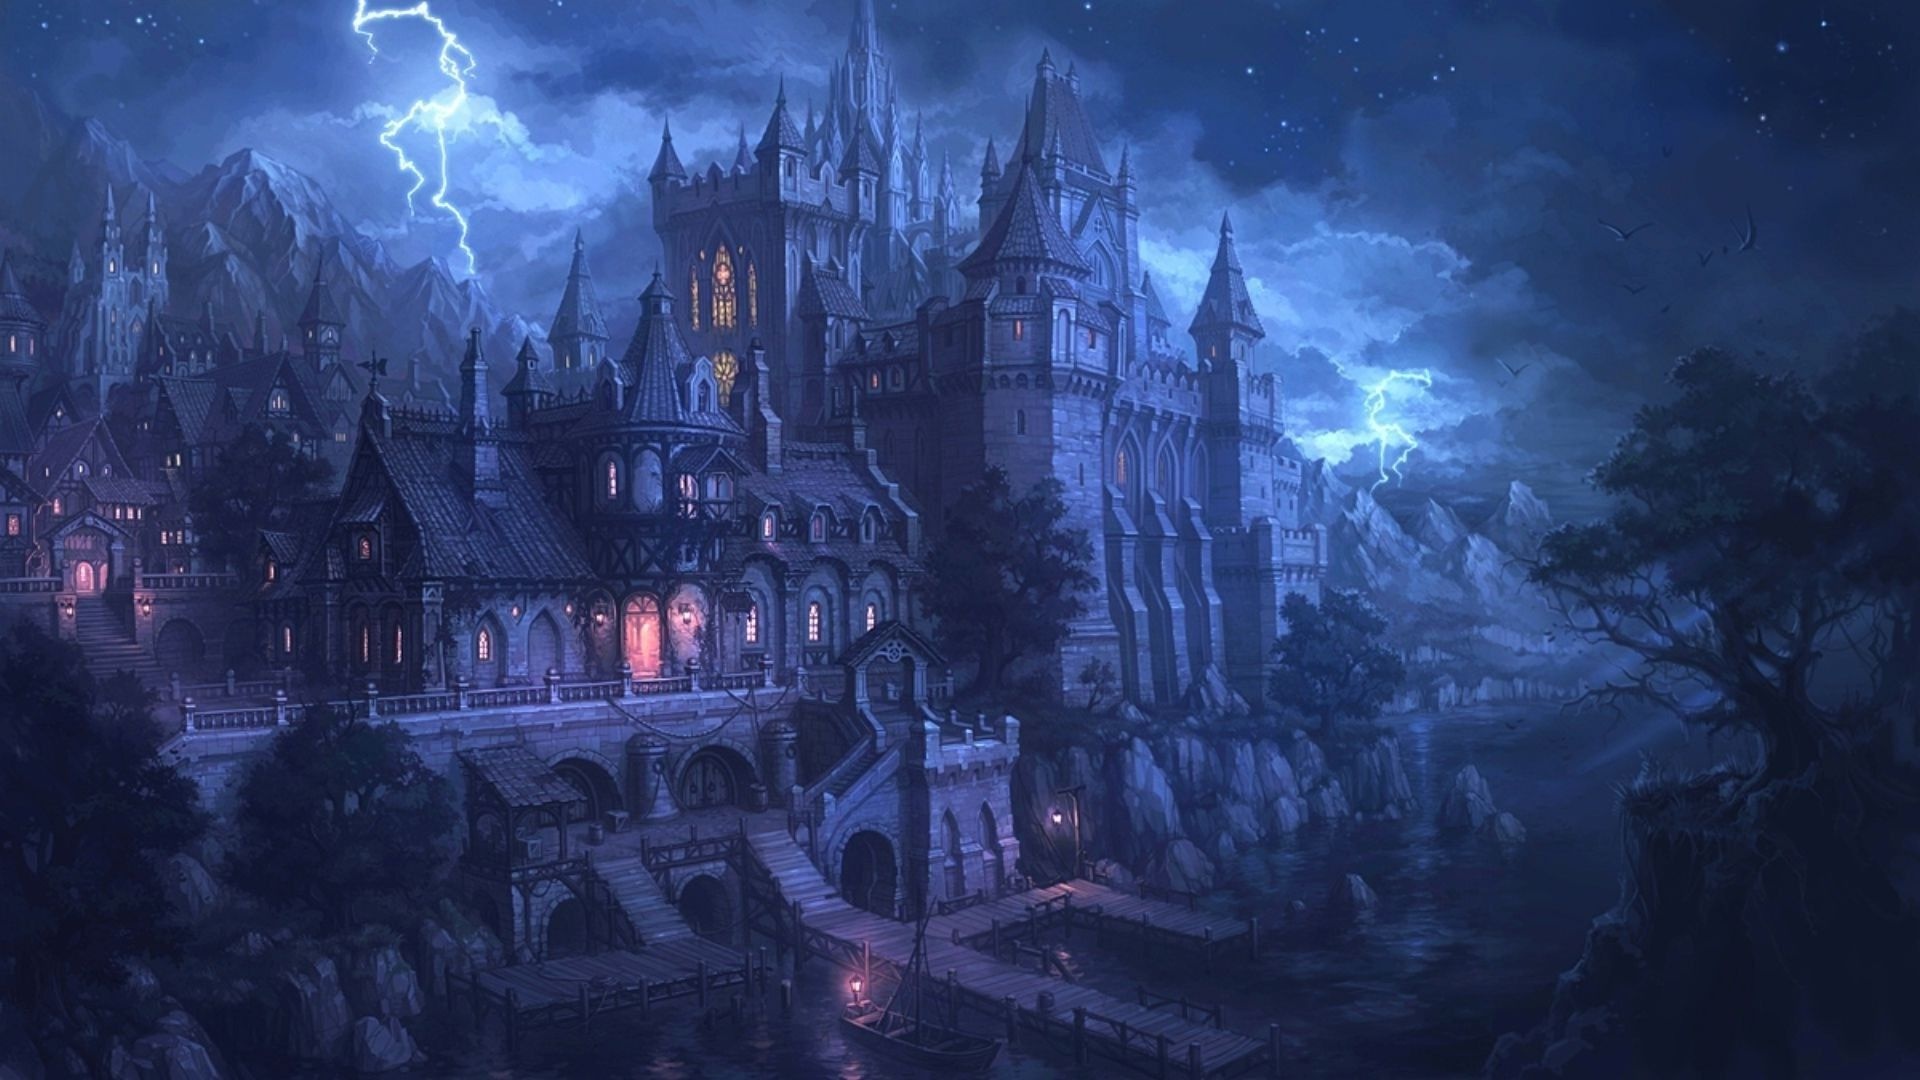 Gothic Art: Lightning, Middle Ages architecture, Castle by a river, Stormy dark atmosphere. 1920x1080 Full HD Background.